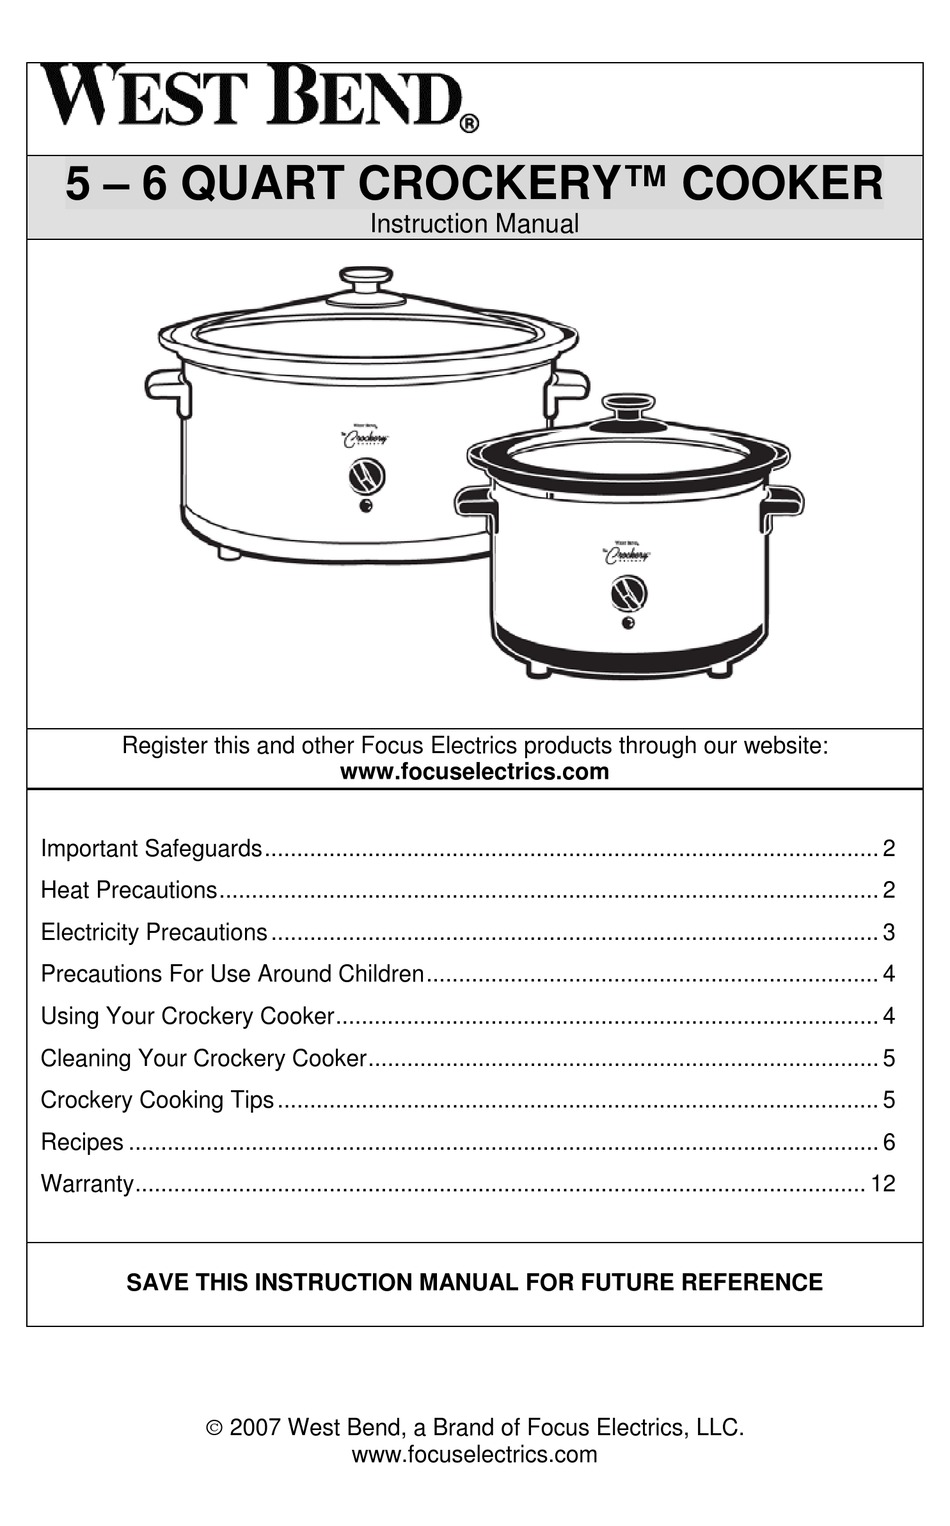 User manual WestBend Stir Crazy 82306 (English - 24 pages)